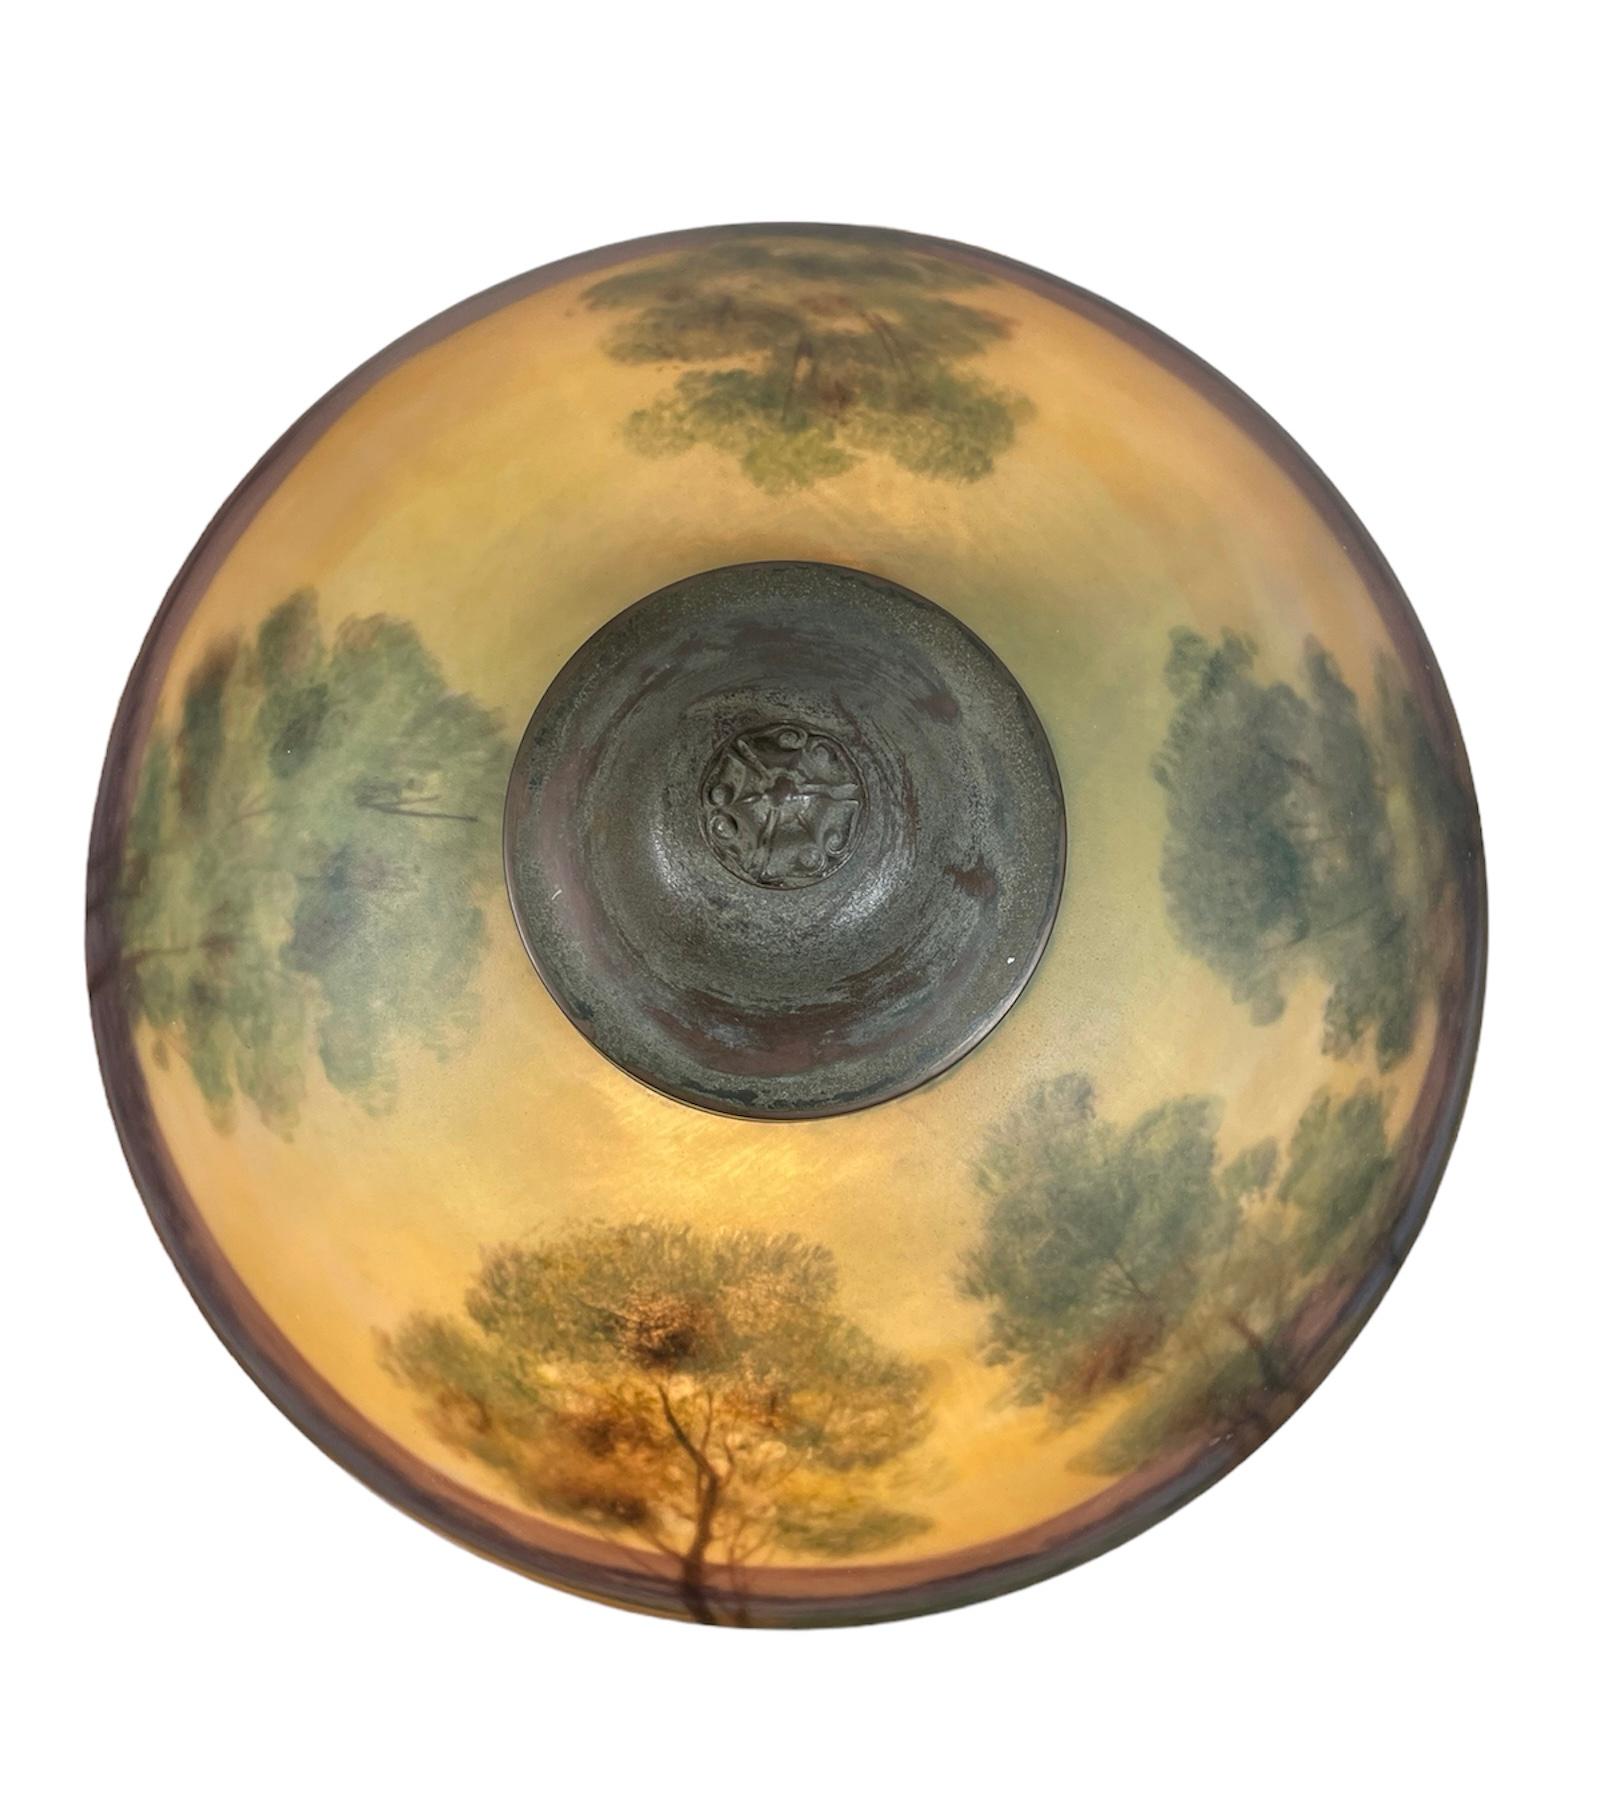 This is a Reverse Painting Dome Glass Shade and Bronze Table Lamp. It depicts a landscape with several tall green trees, dry grass and a lake. The background has blue, brown, green and purple color shades. The heavy iron metal stand of the lamp is